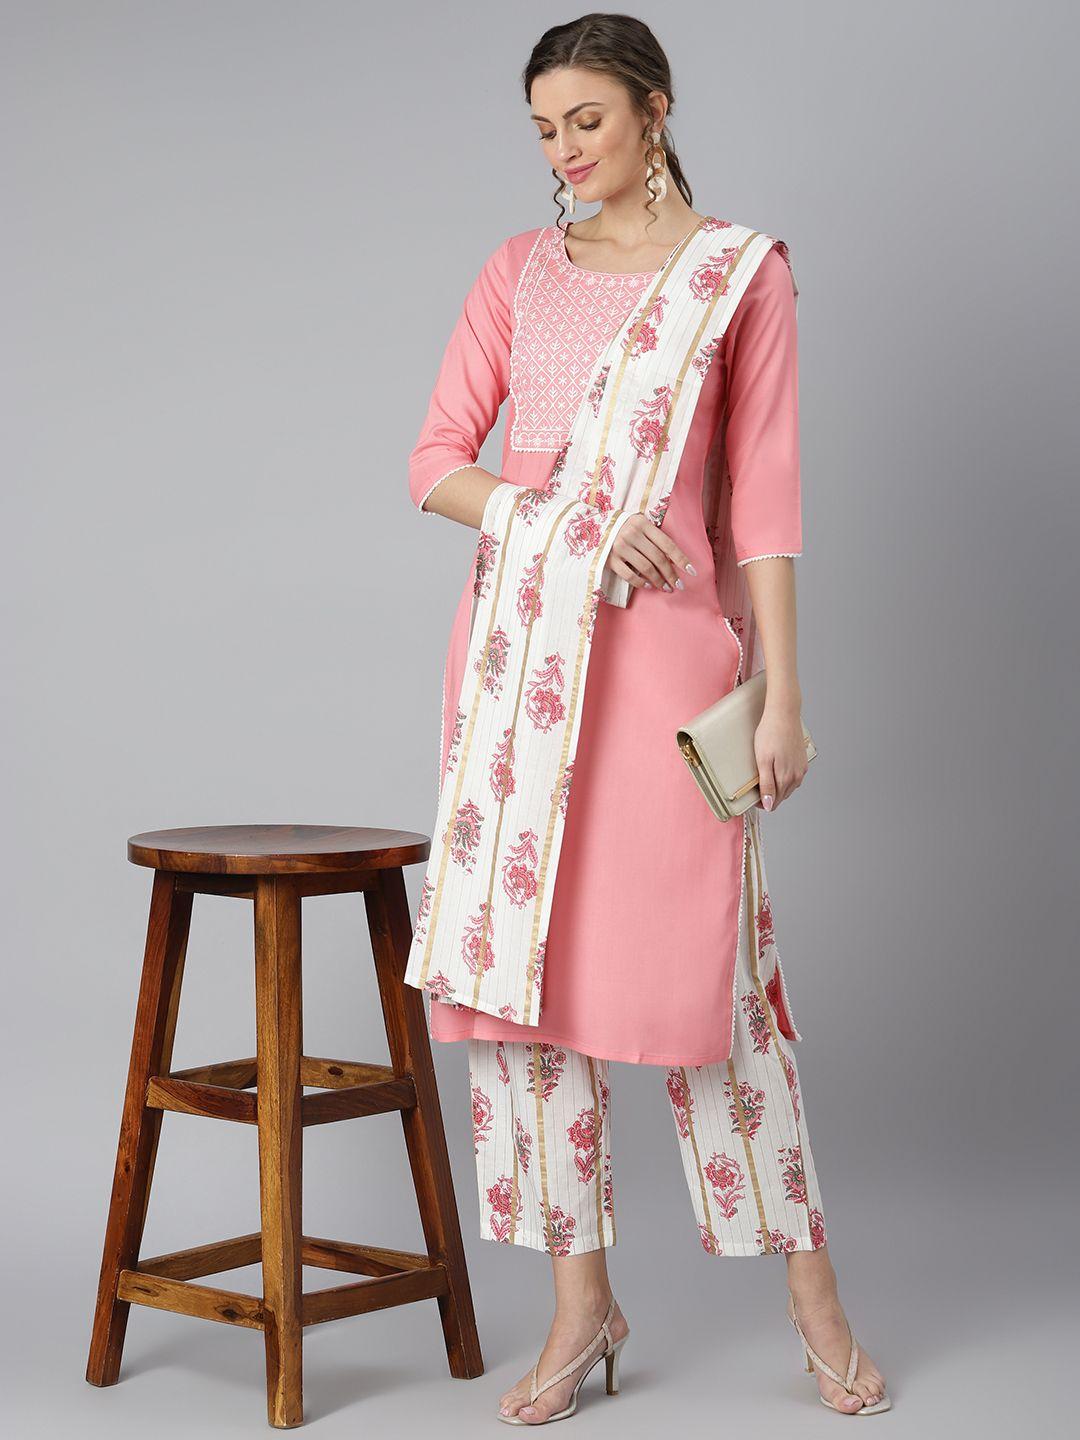 khushal-k-women-floral-embroidered-thread-work-kurta-with-palazzos-&-dupatta